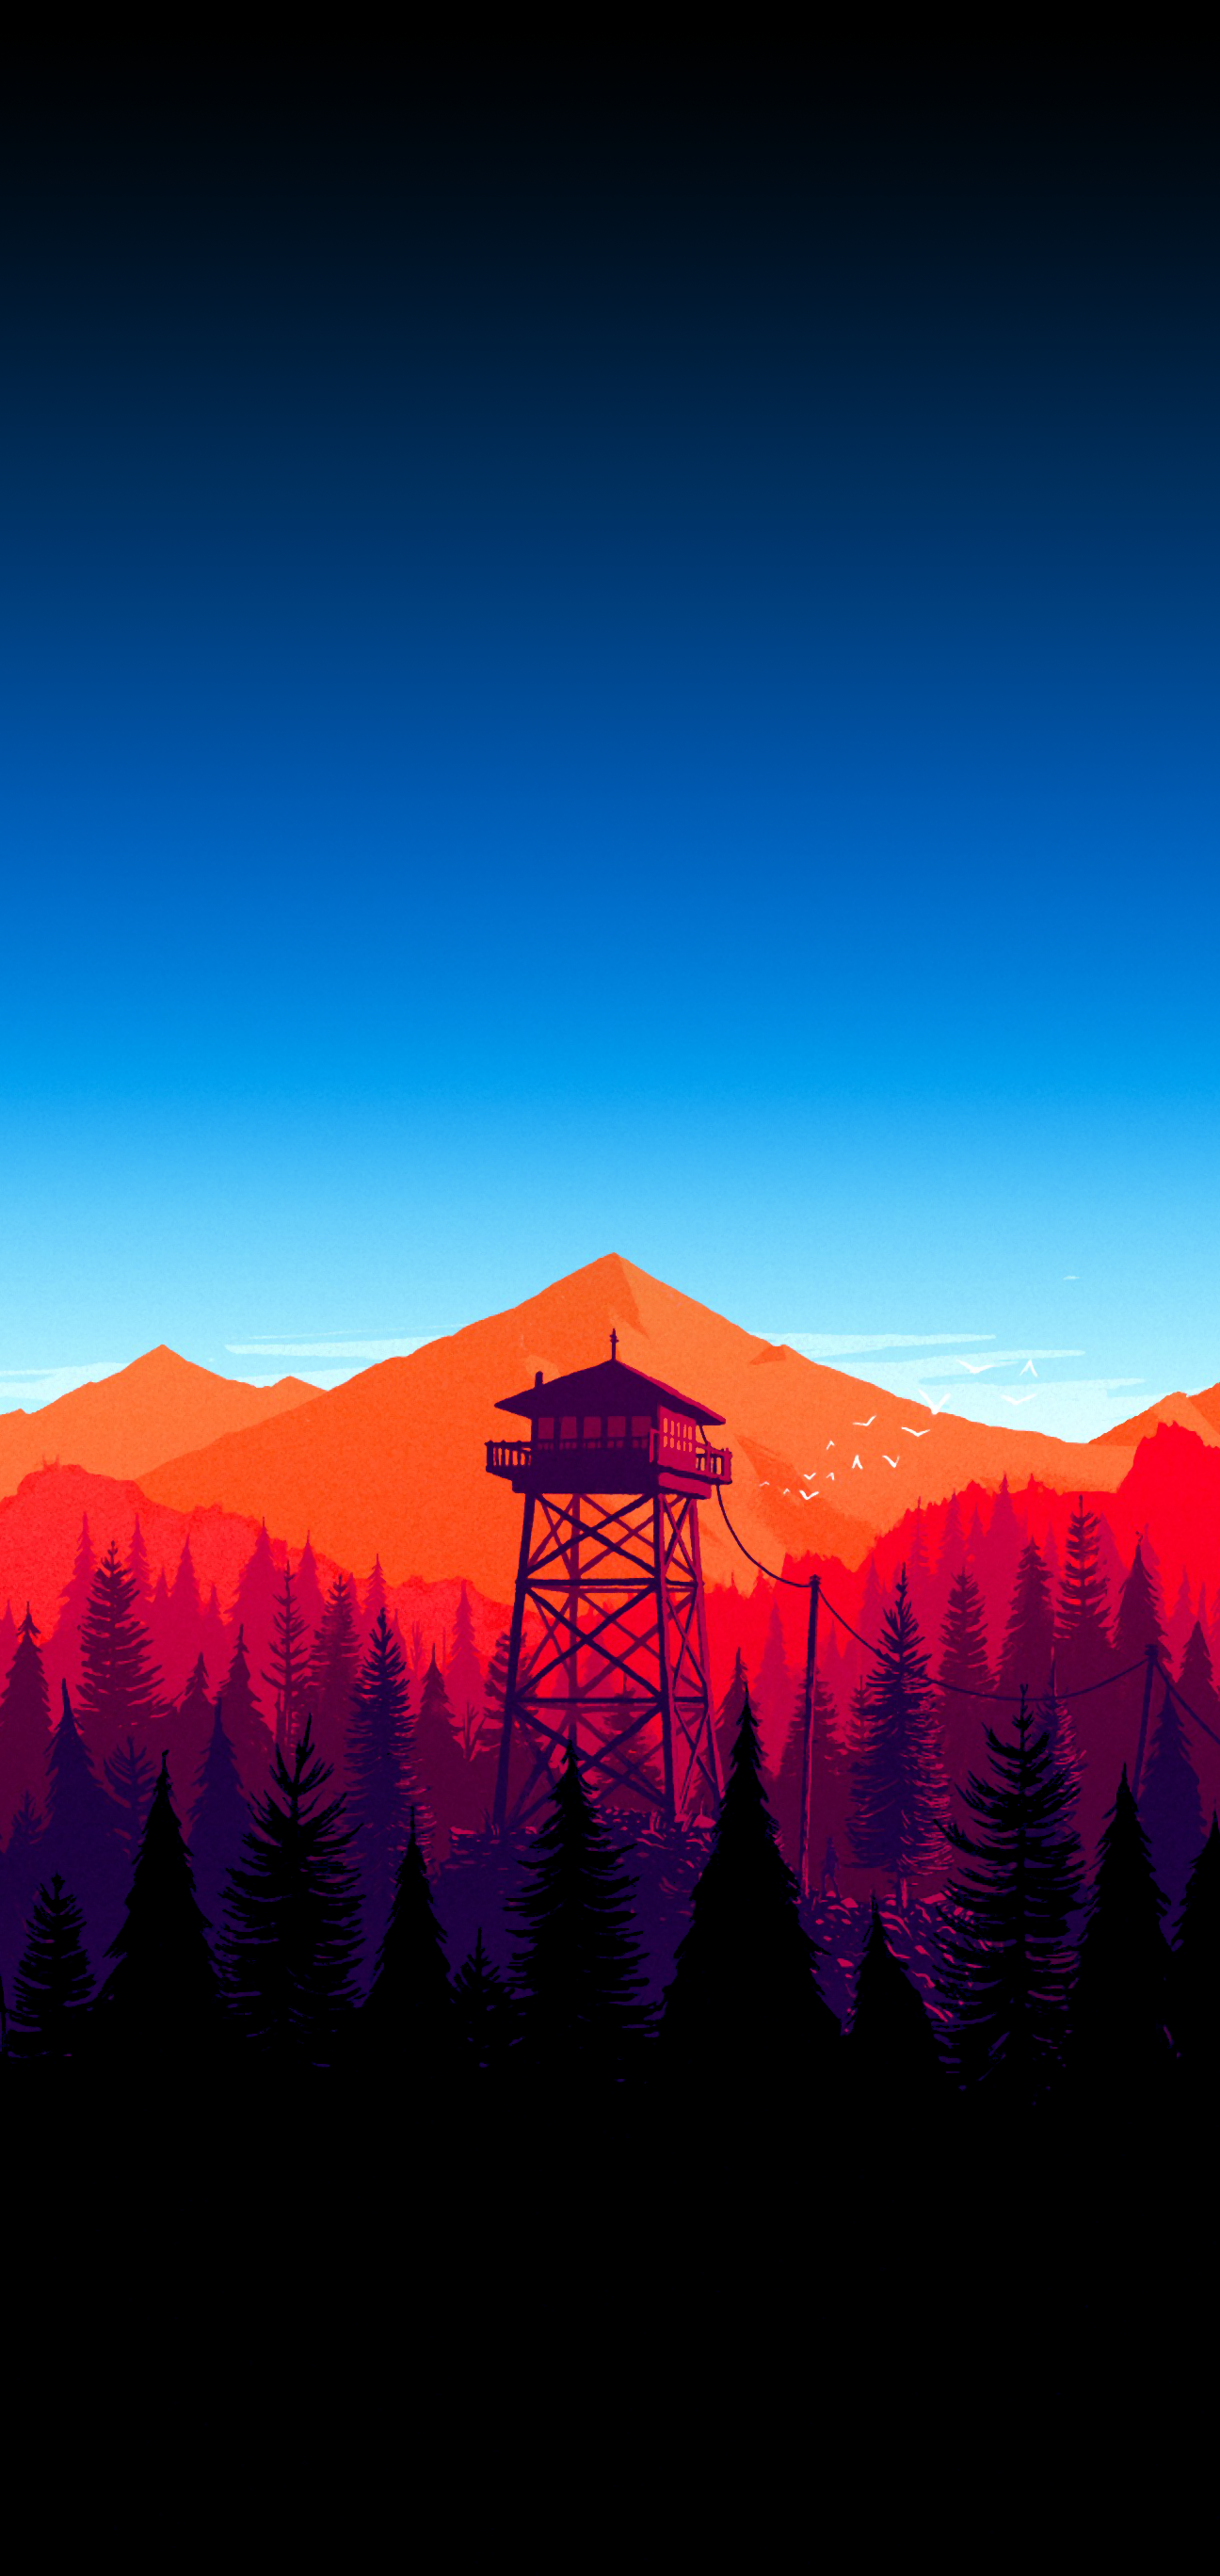 Set Of Perfectly Aligned Firewatch AMOLED Wallpaper For Your Phone! You Can Put One On Your Lock Screen And The Other On Your Home Screen To Create A Cool Day Night Cycle Effect!